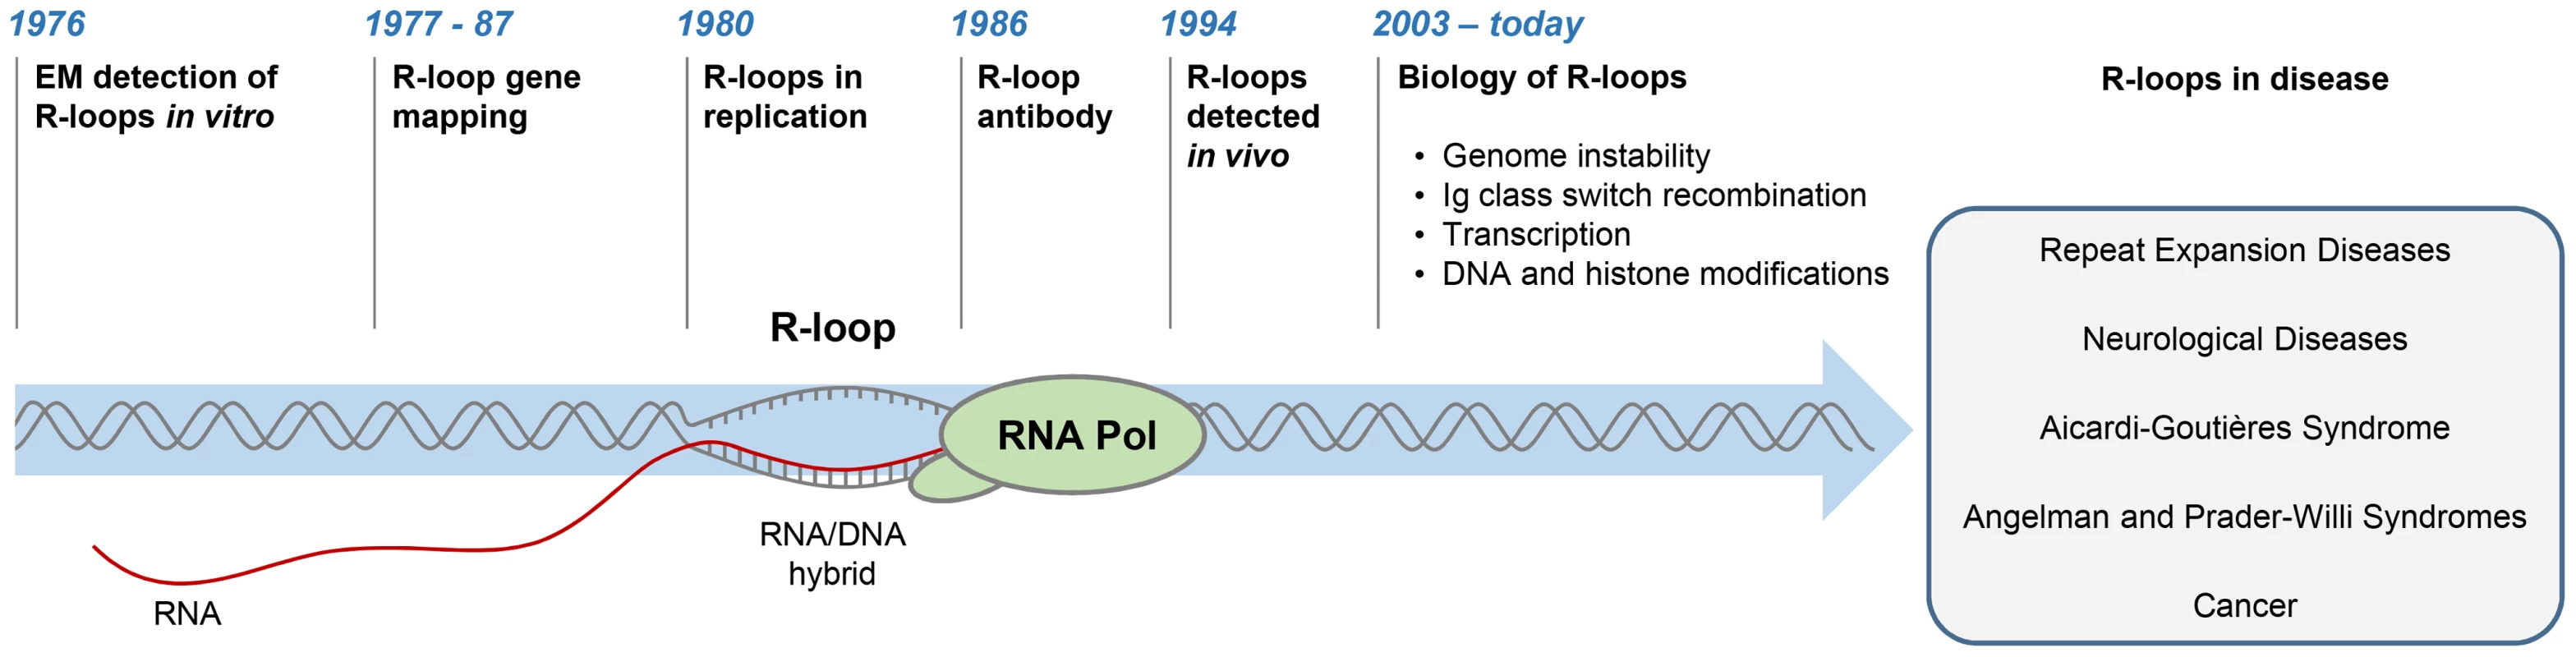 History of R-loop research.